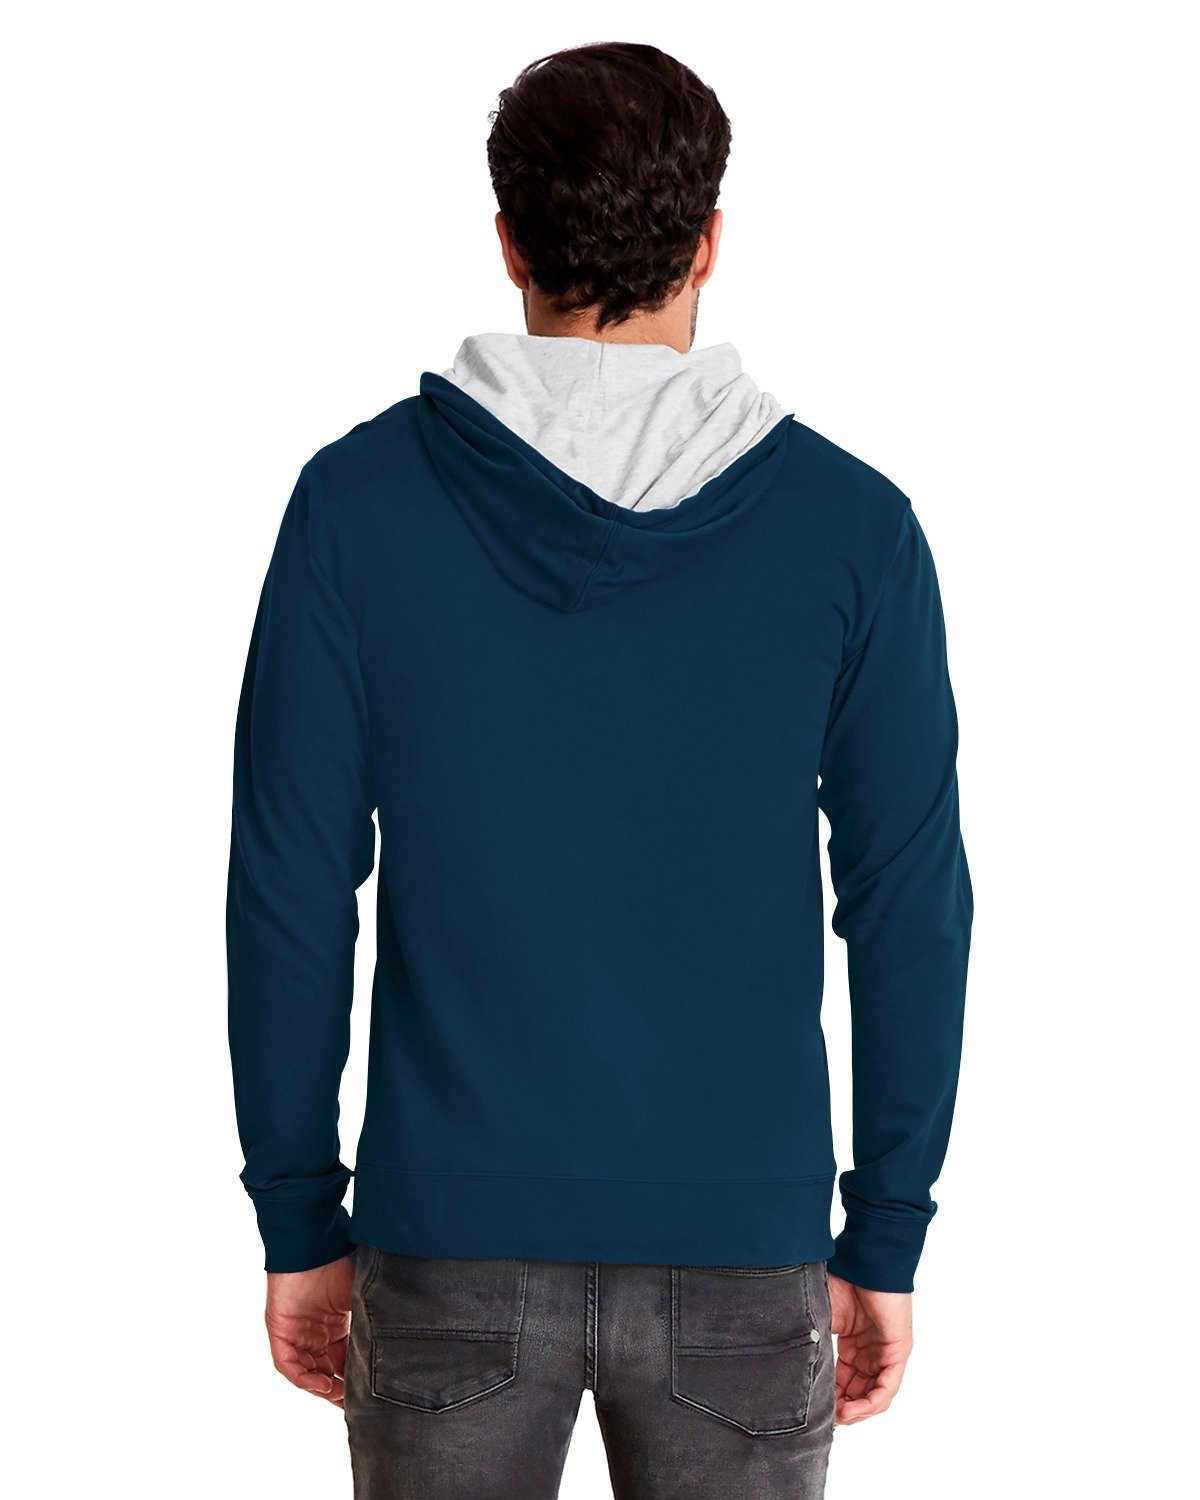 9601-Next Level Apparel-MID NVY/ HTH GRY-Next Level Apparel-Sweatshirts-2